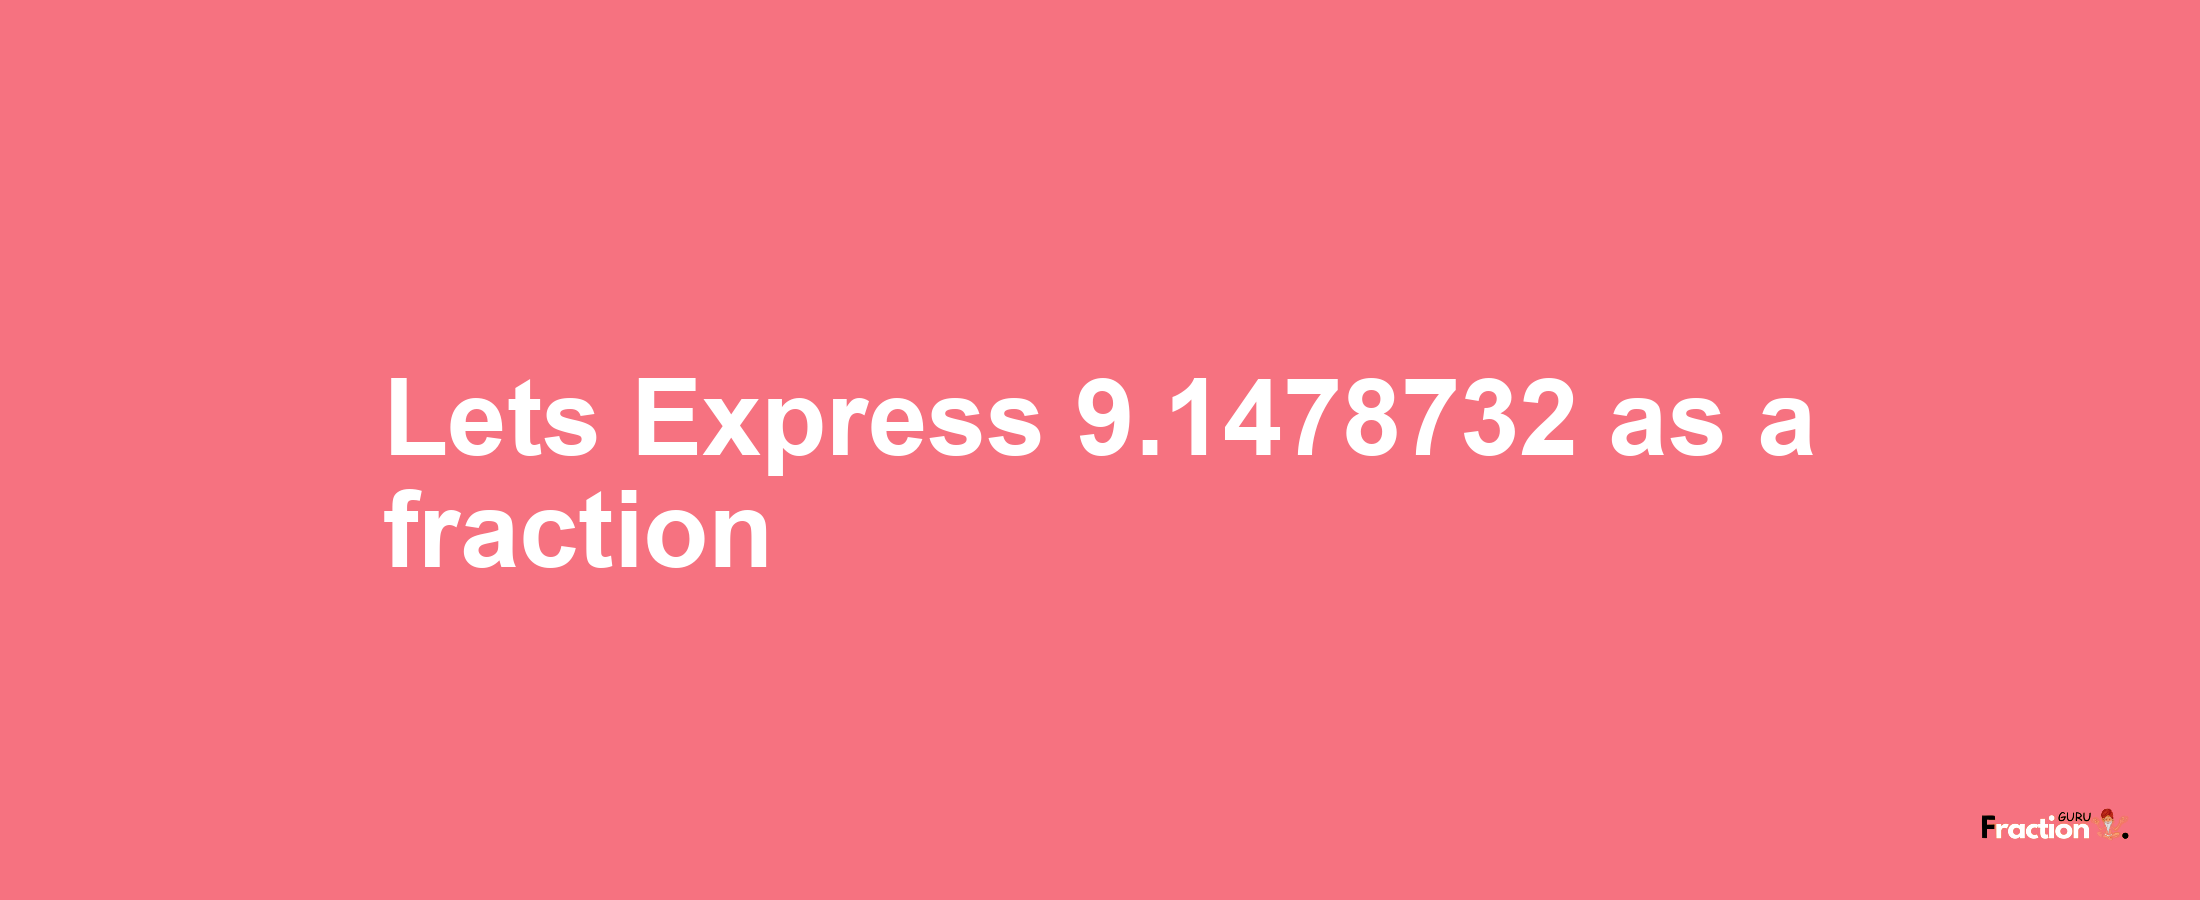 Lets Express 9.1478732 as afraction